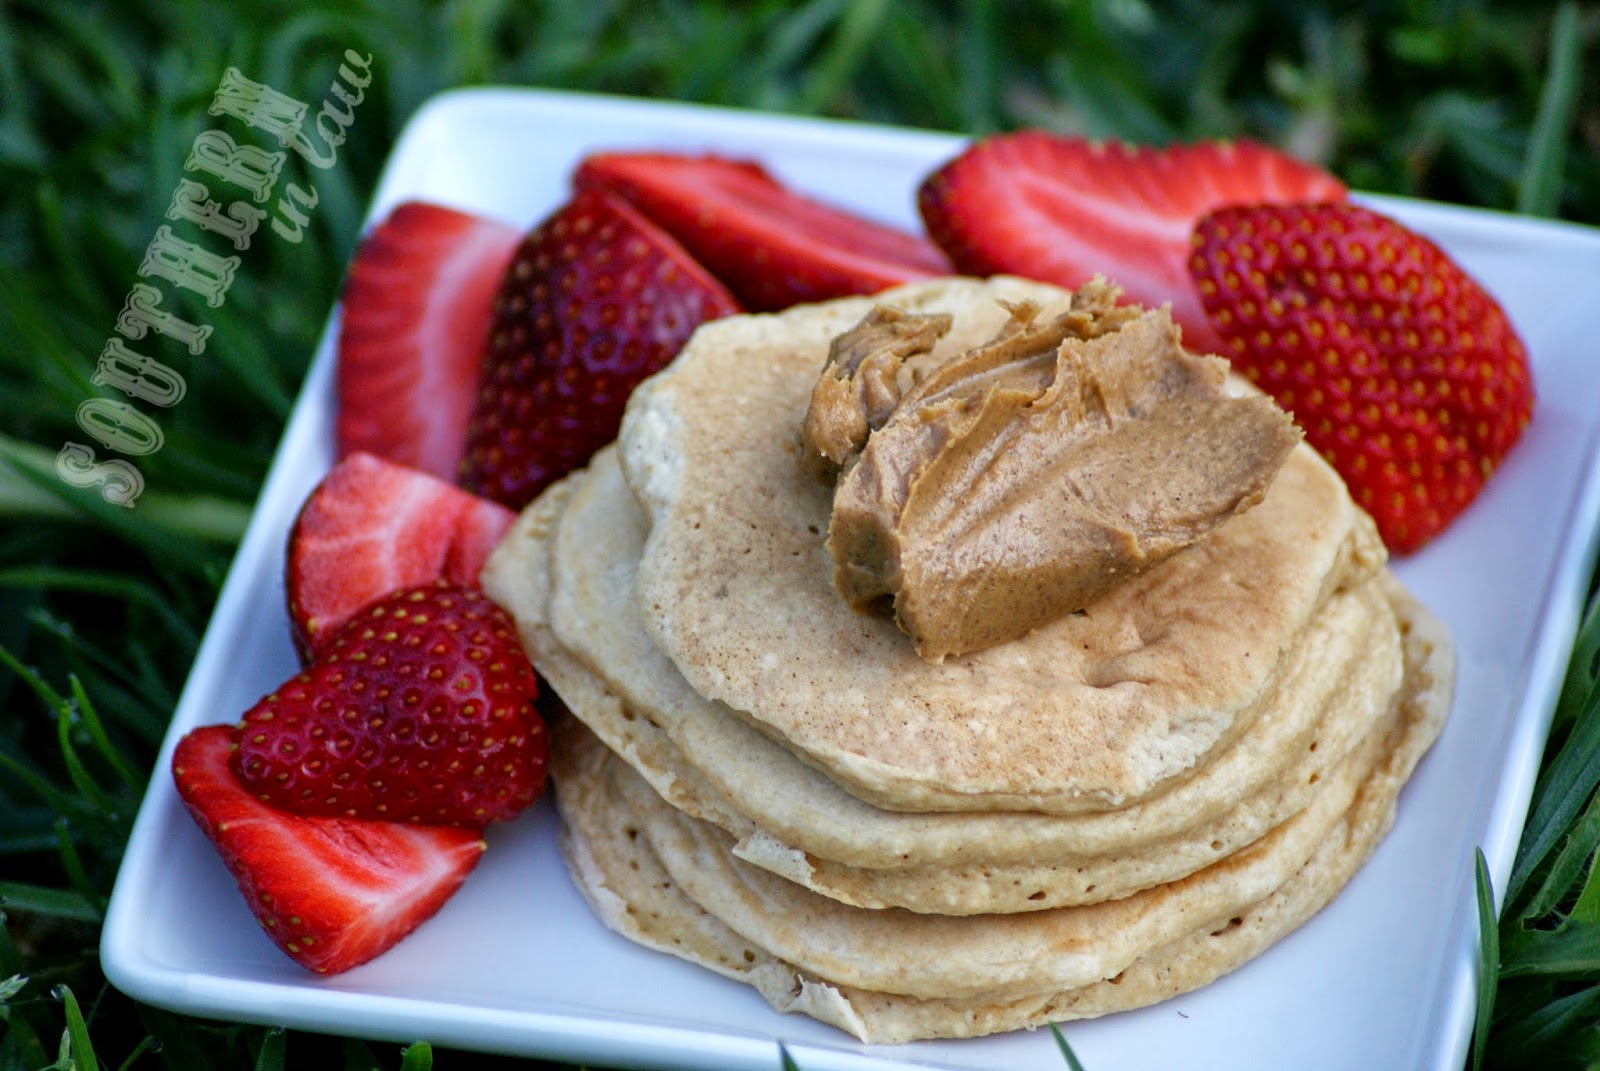 Cold Healthy Buttermilk Pancakes Topped with Peanut Butter and Strawberries